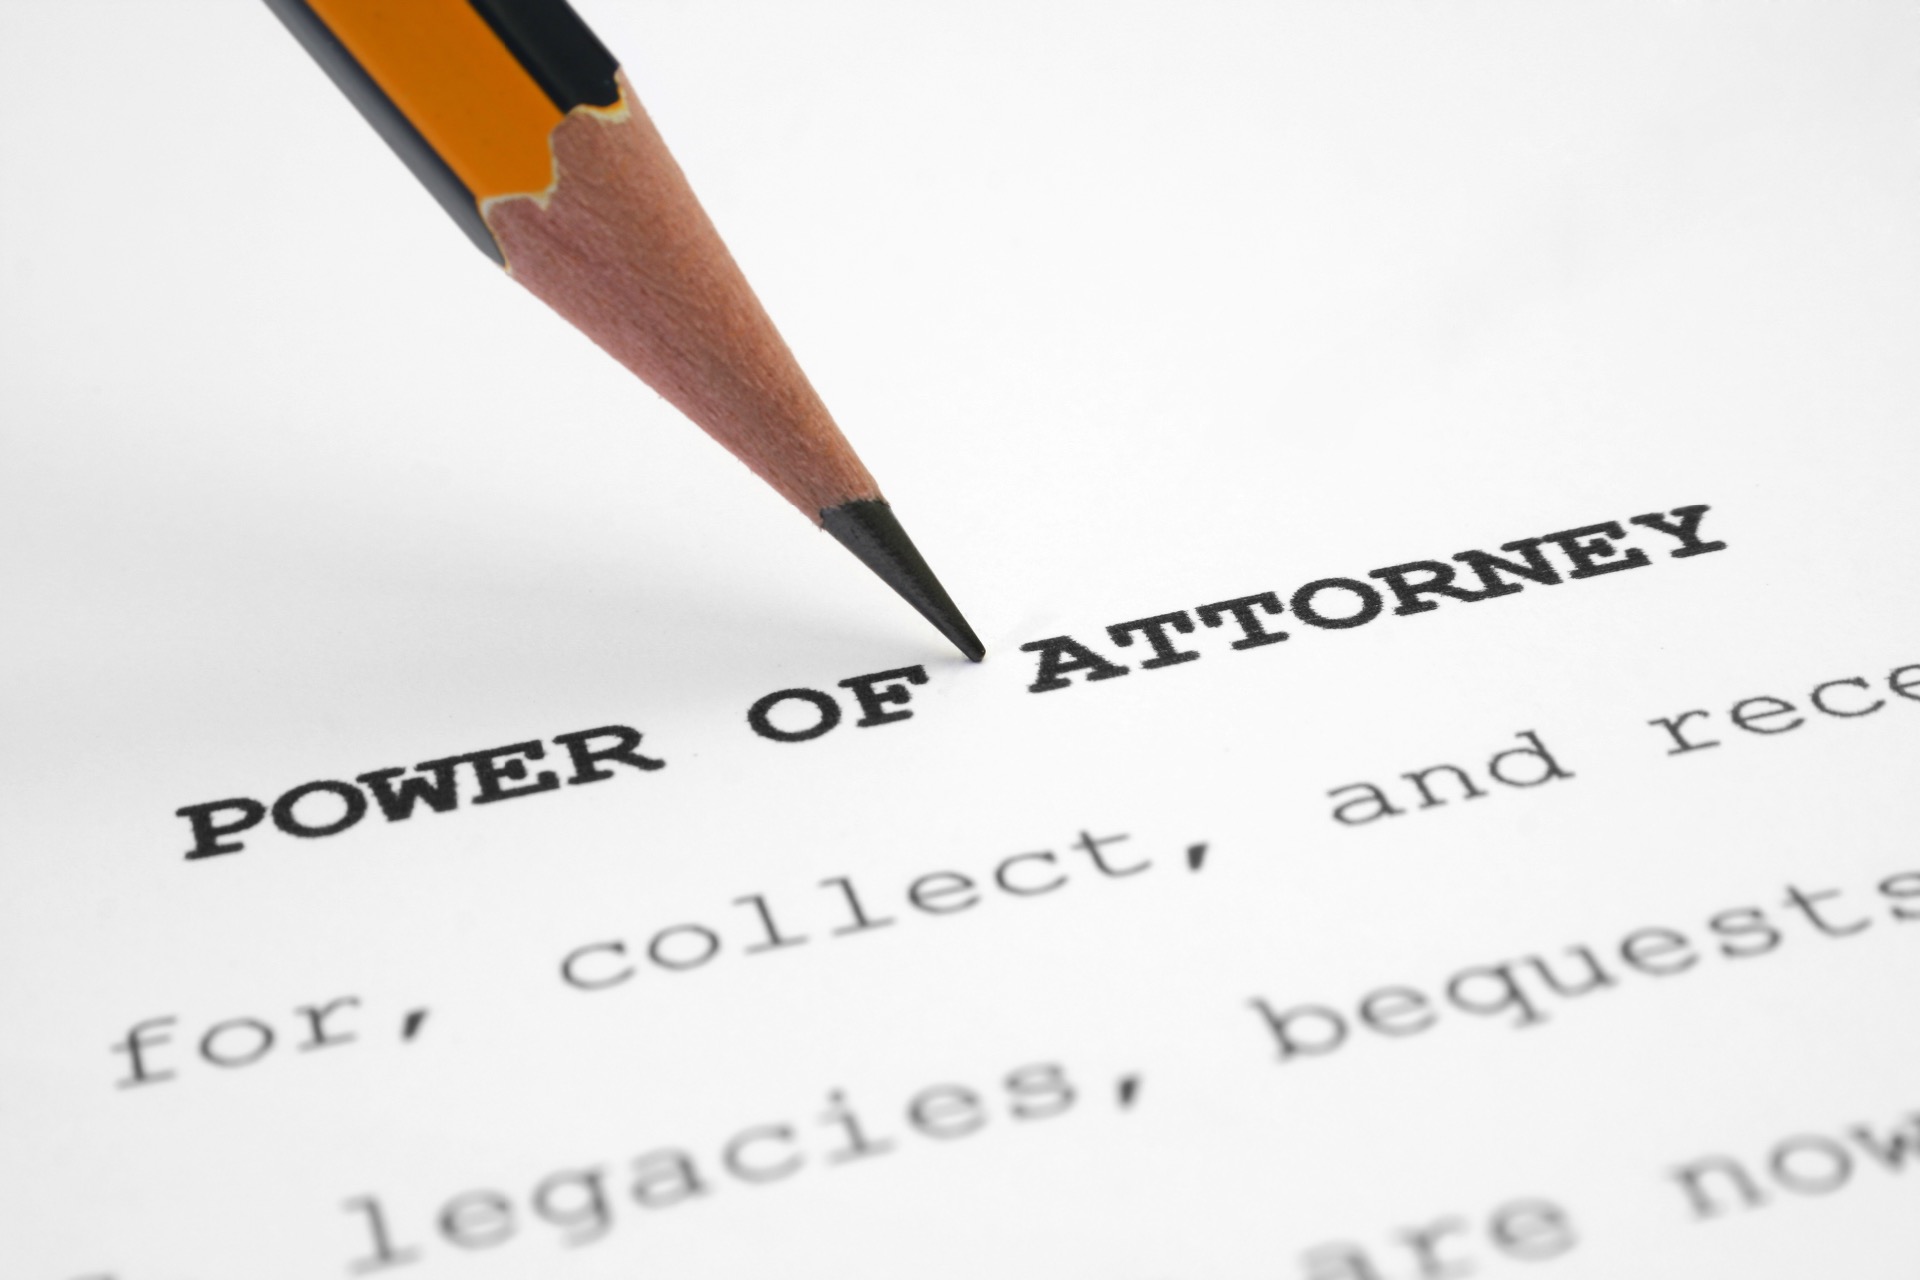 Lasting Power of Attorney Solicitors near me